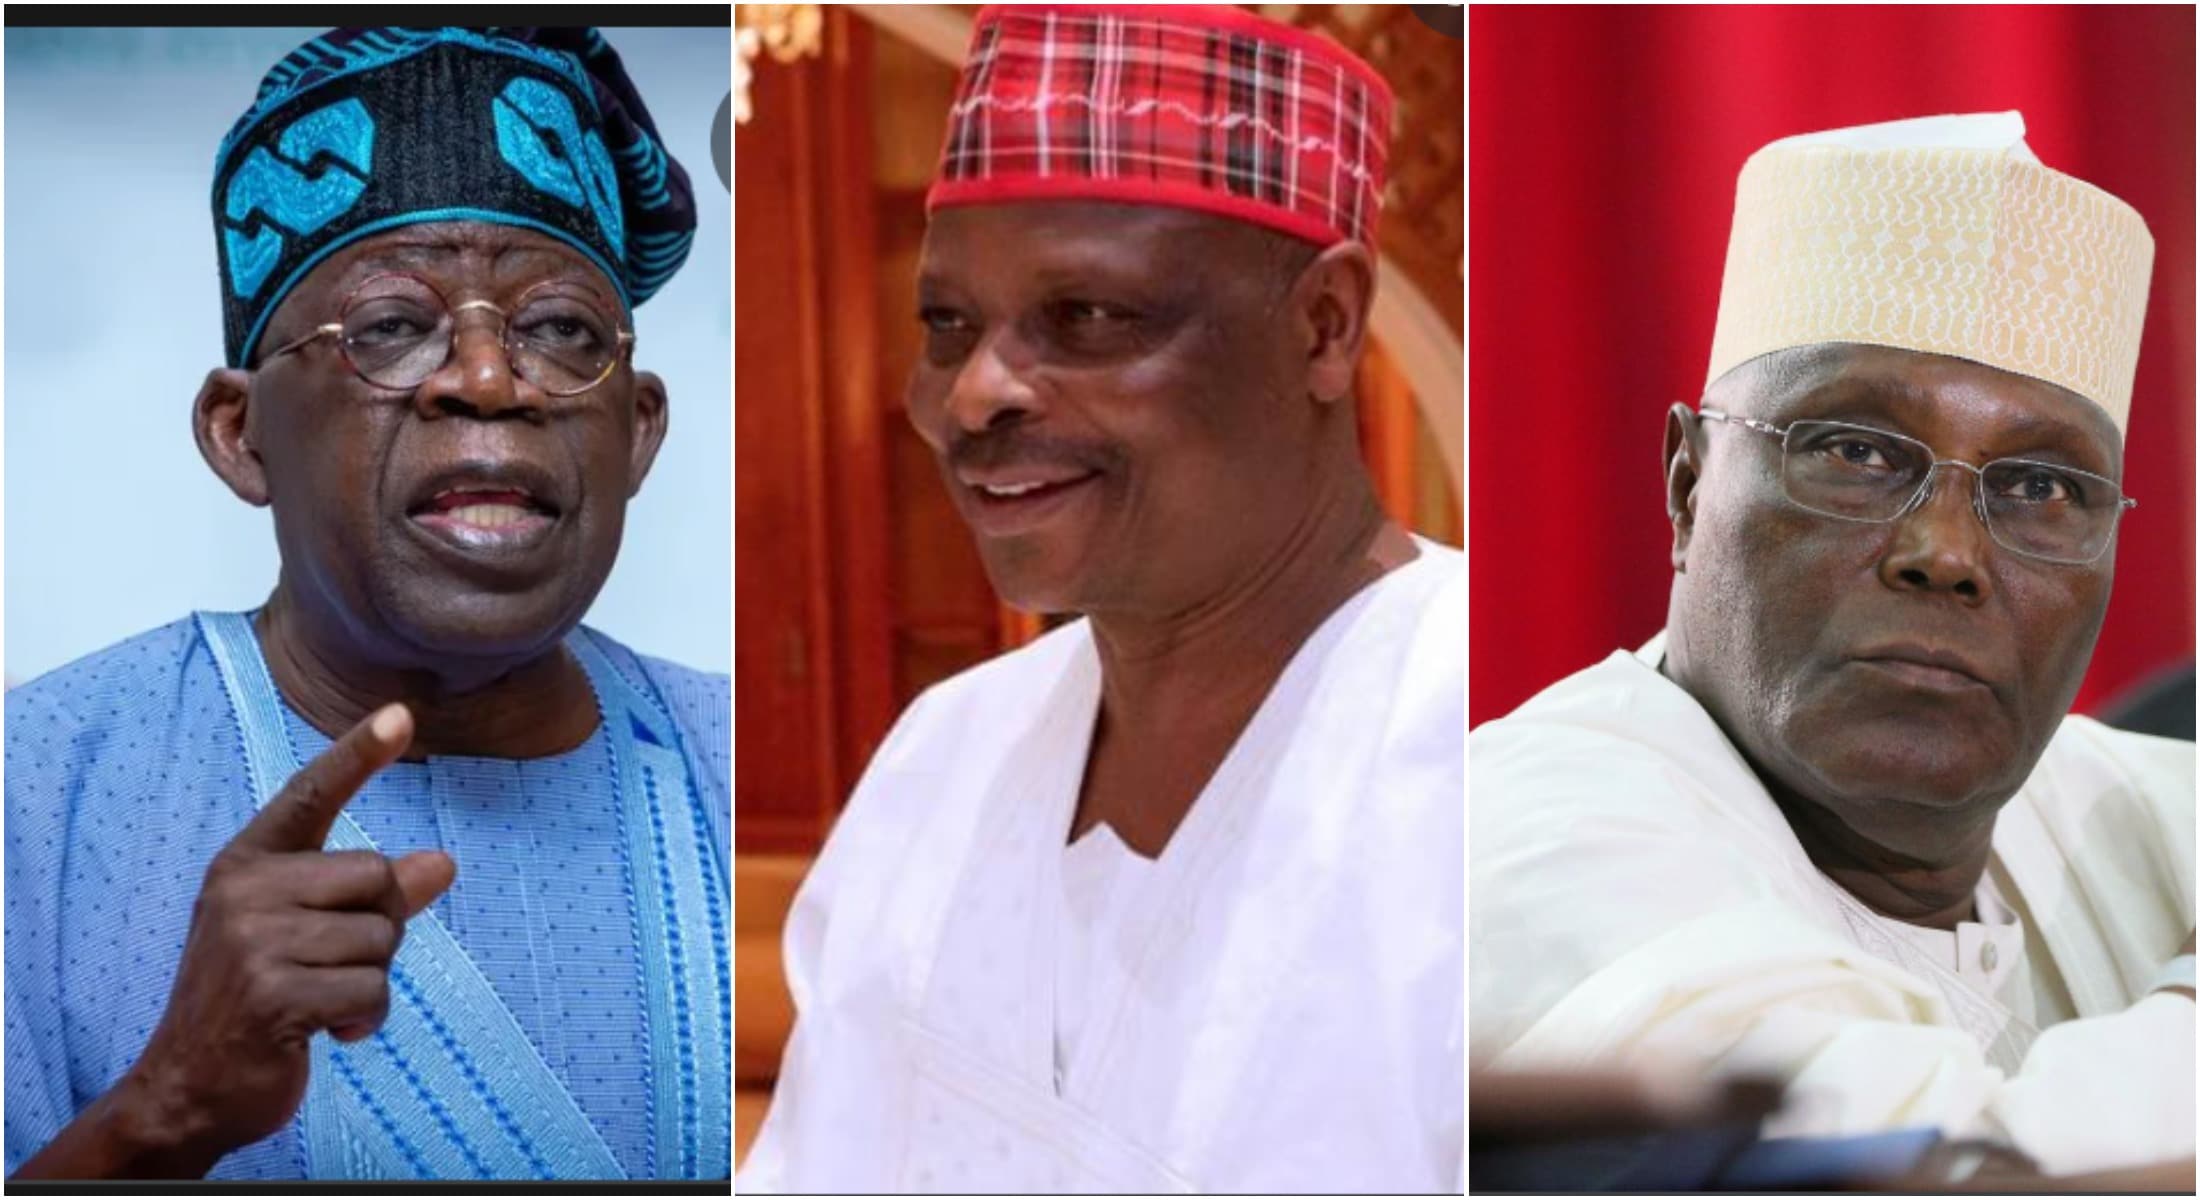 Latest Political News In Nigeria For Today, Friday, 17th June, 2022